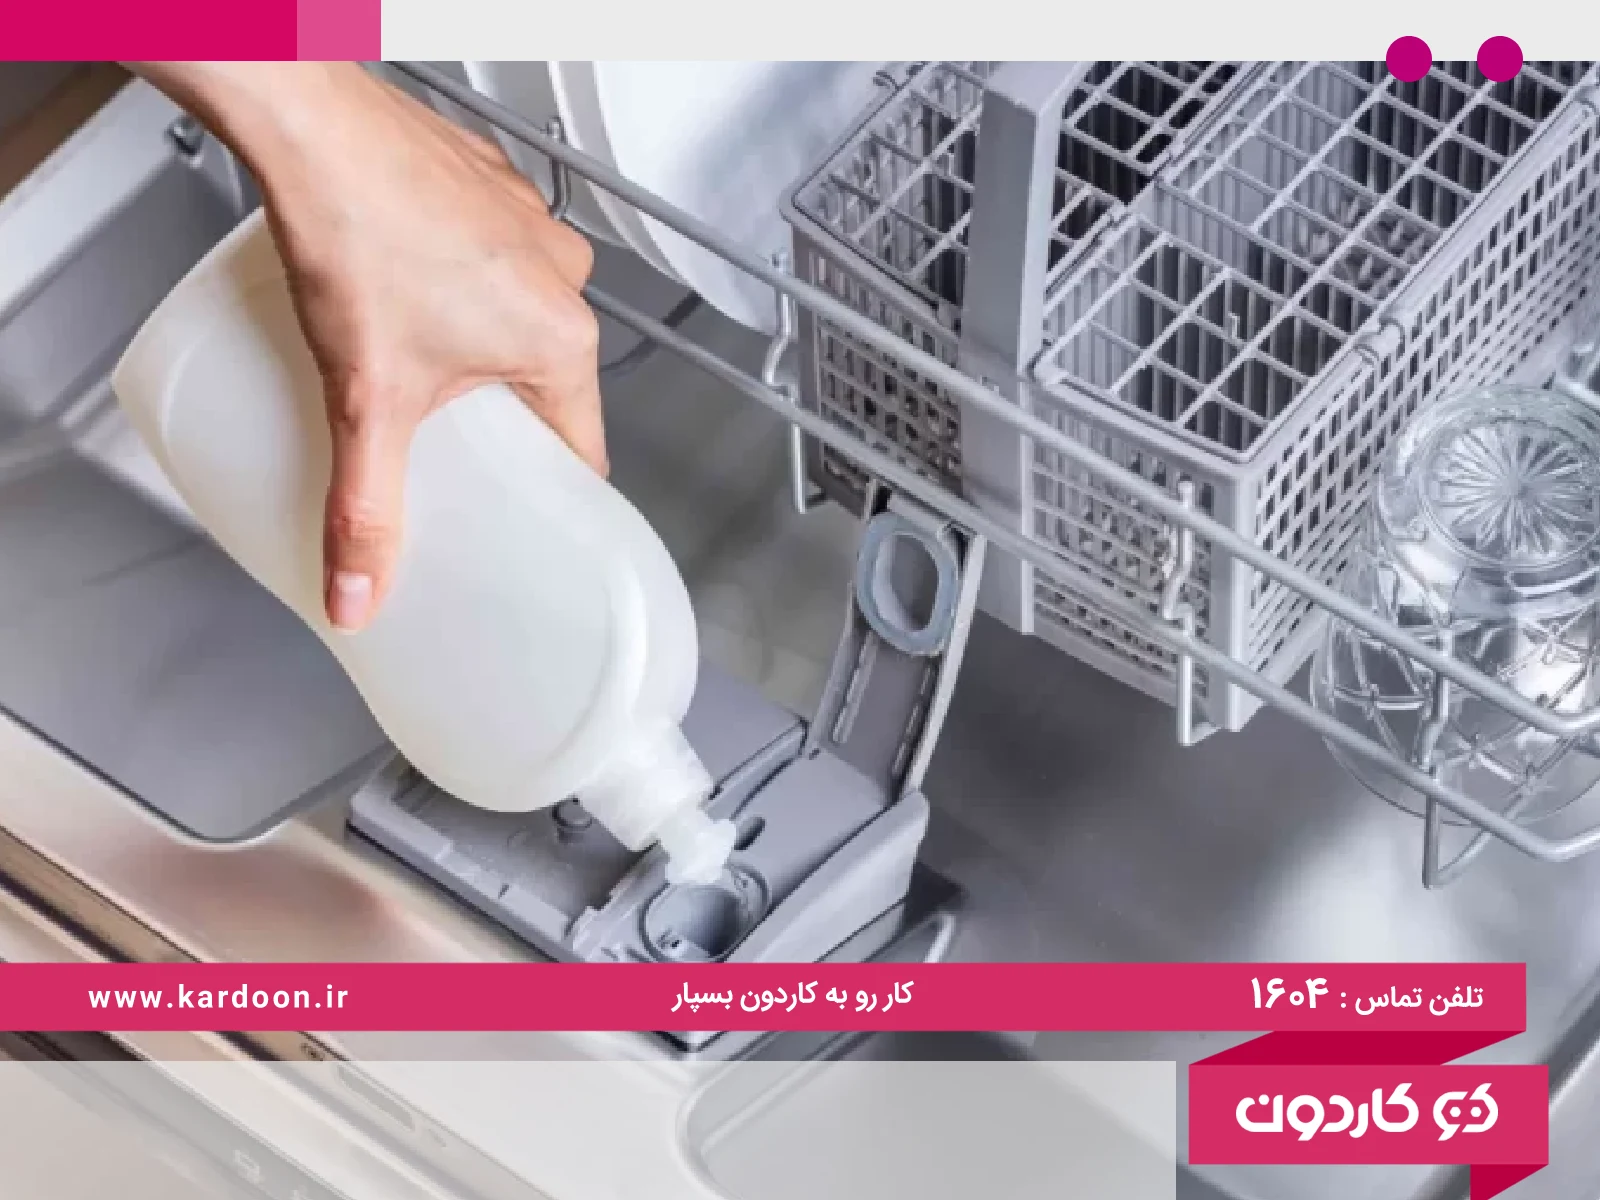 How to use the polishing liquid in the dishwasher